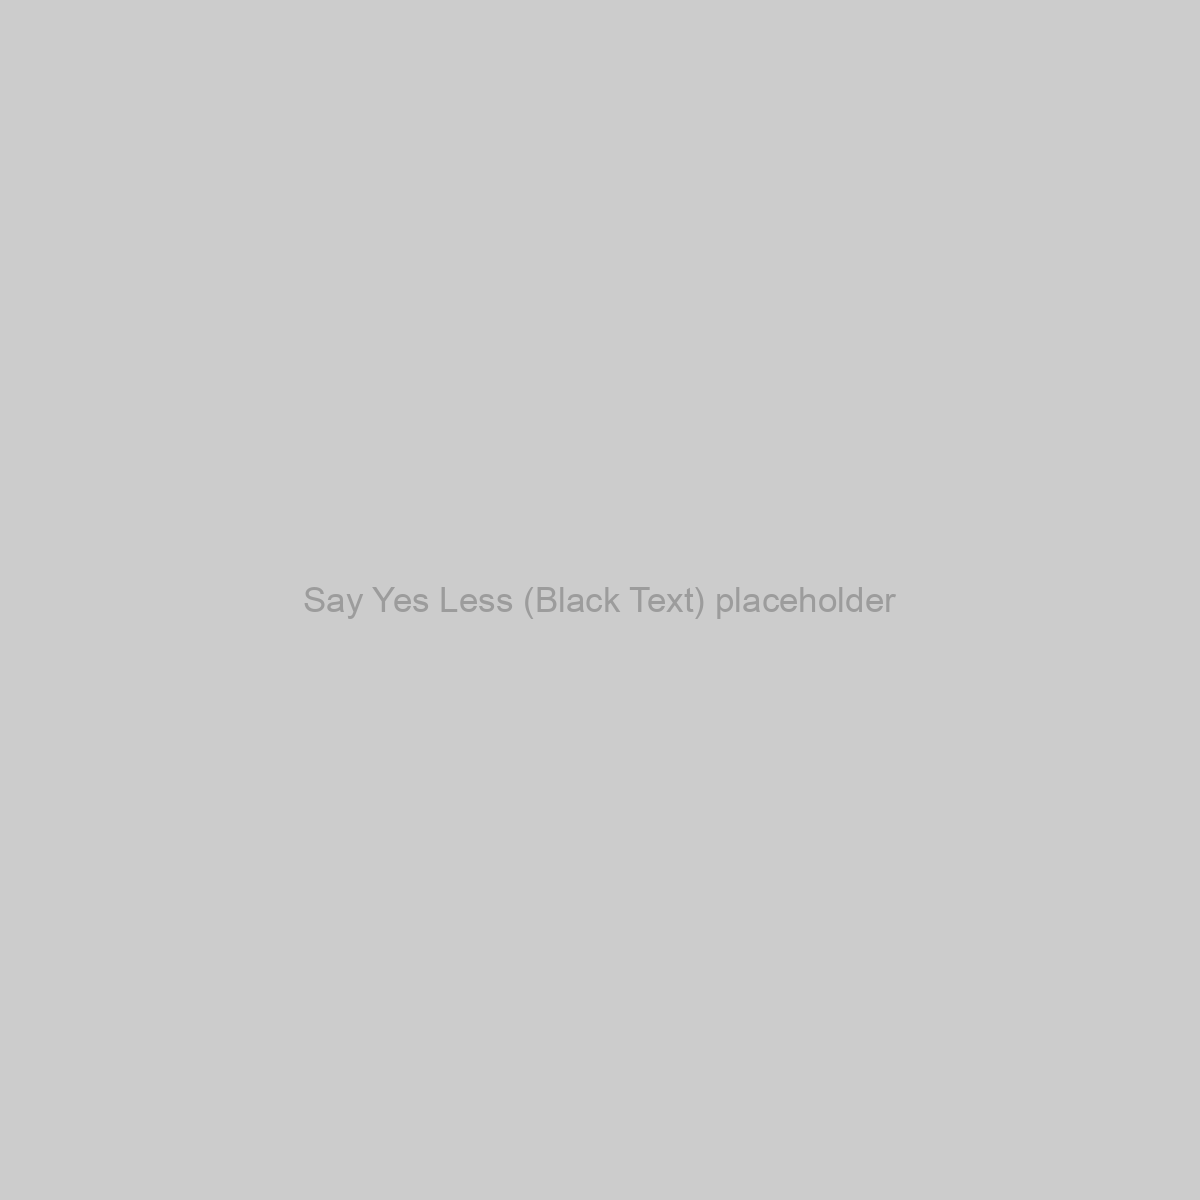 Say Yes Less (Black Text) Placeholder Image